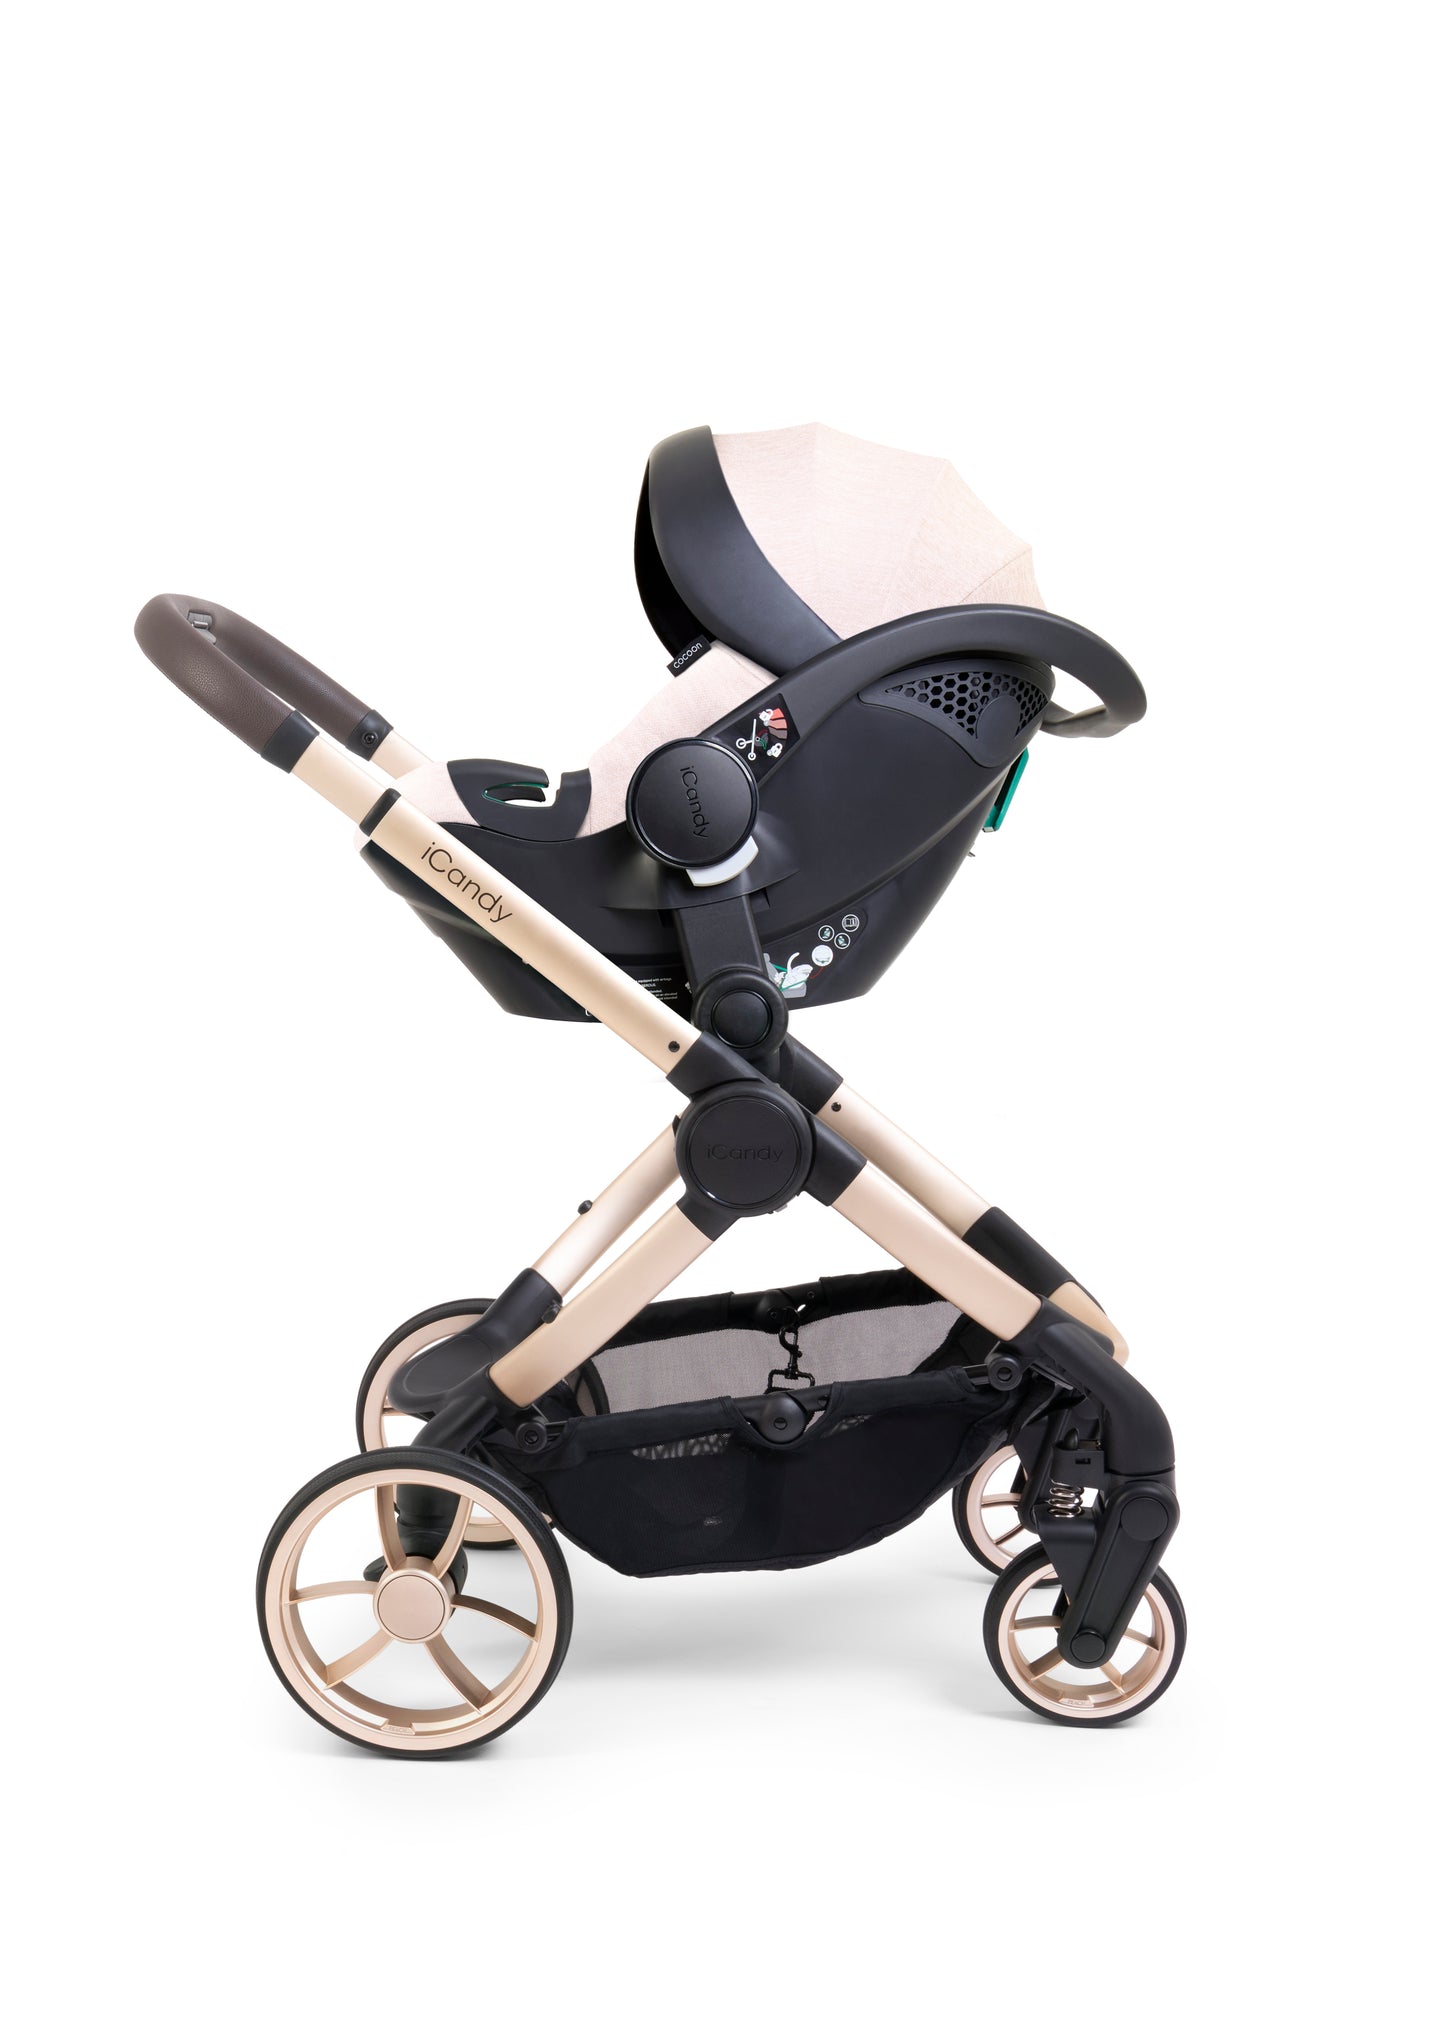 iCandy Peach 7 Pushchair & Carrycot Complete Car Seat Bundle - Biscotti | Blonde Chassis